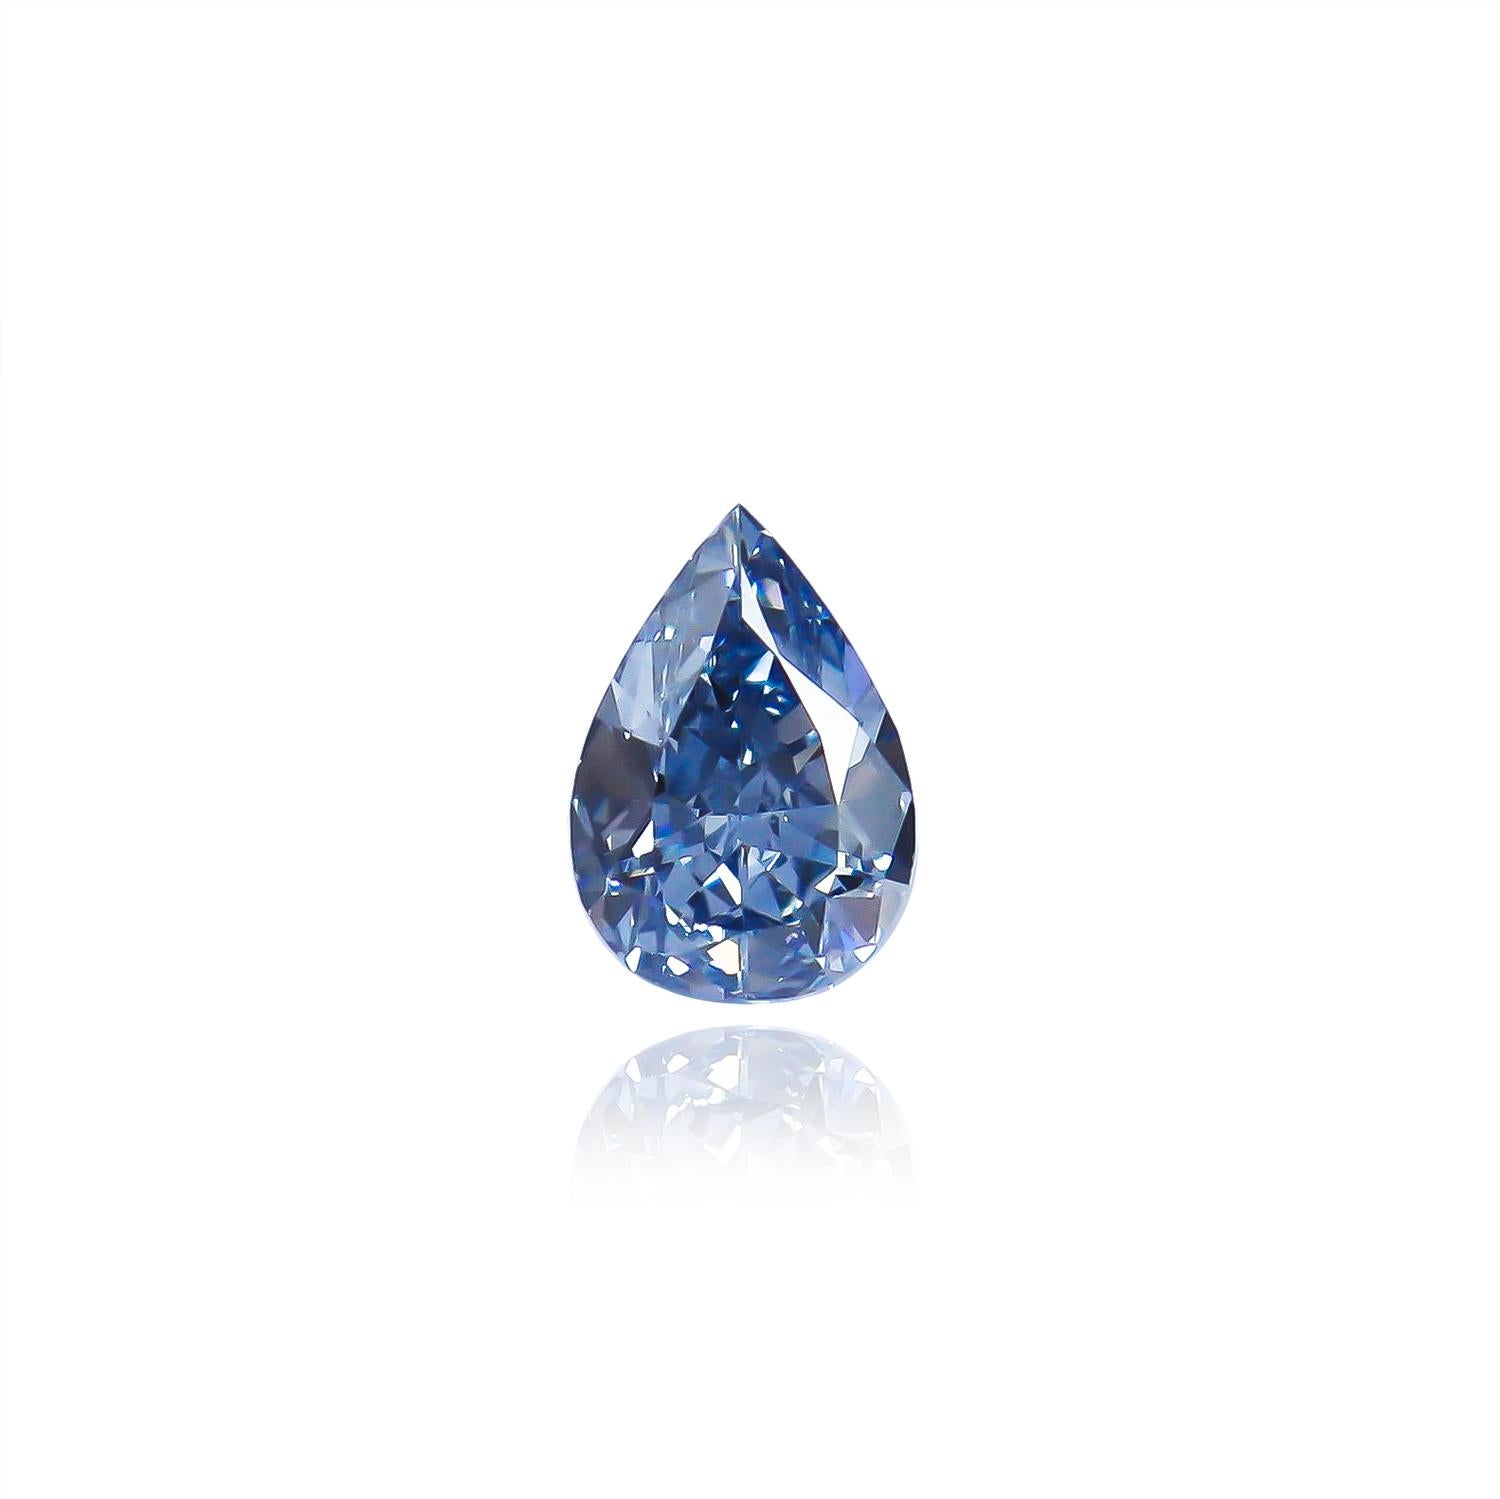 There's blue and then there's blue... This breathtaking stone from J. Birnbach vault is one of the most incredible, natural colored diamonds in the world marketplace! Featuring a 2.61 carat pear modified brilliant cut diamond of fancy vivid blue